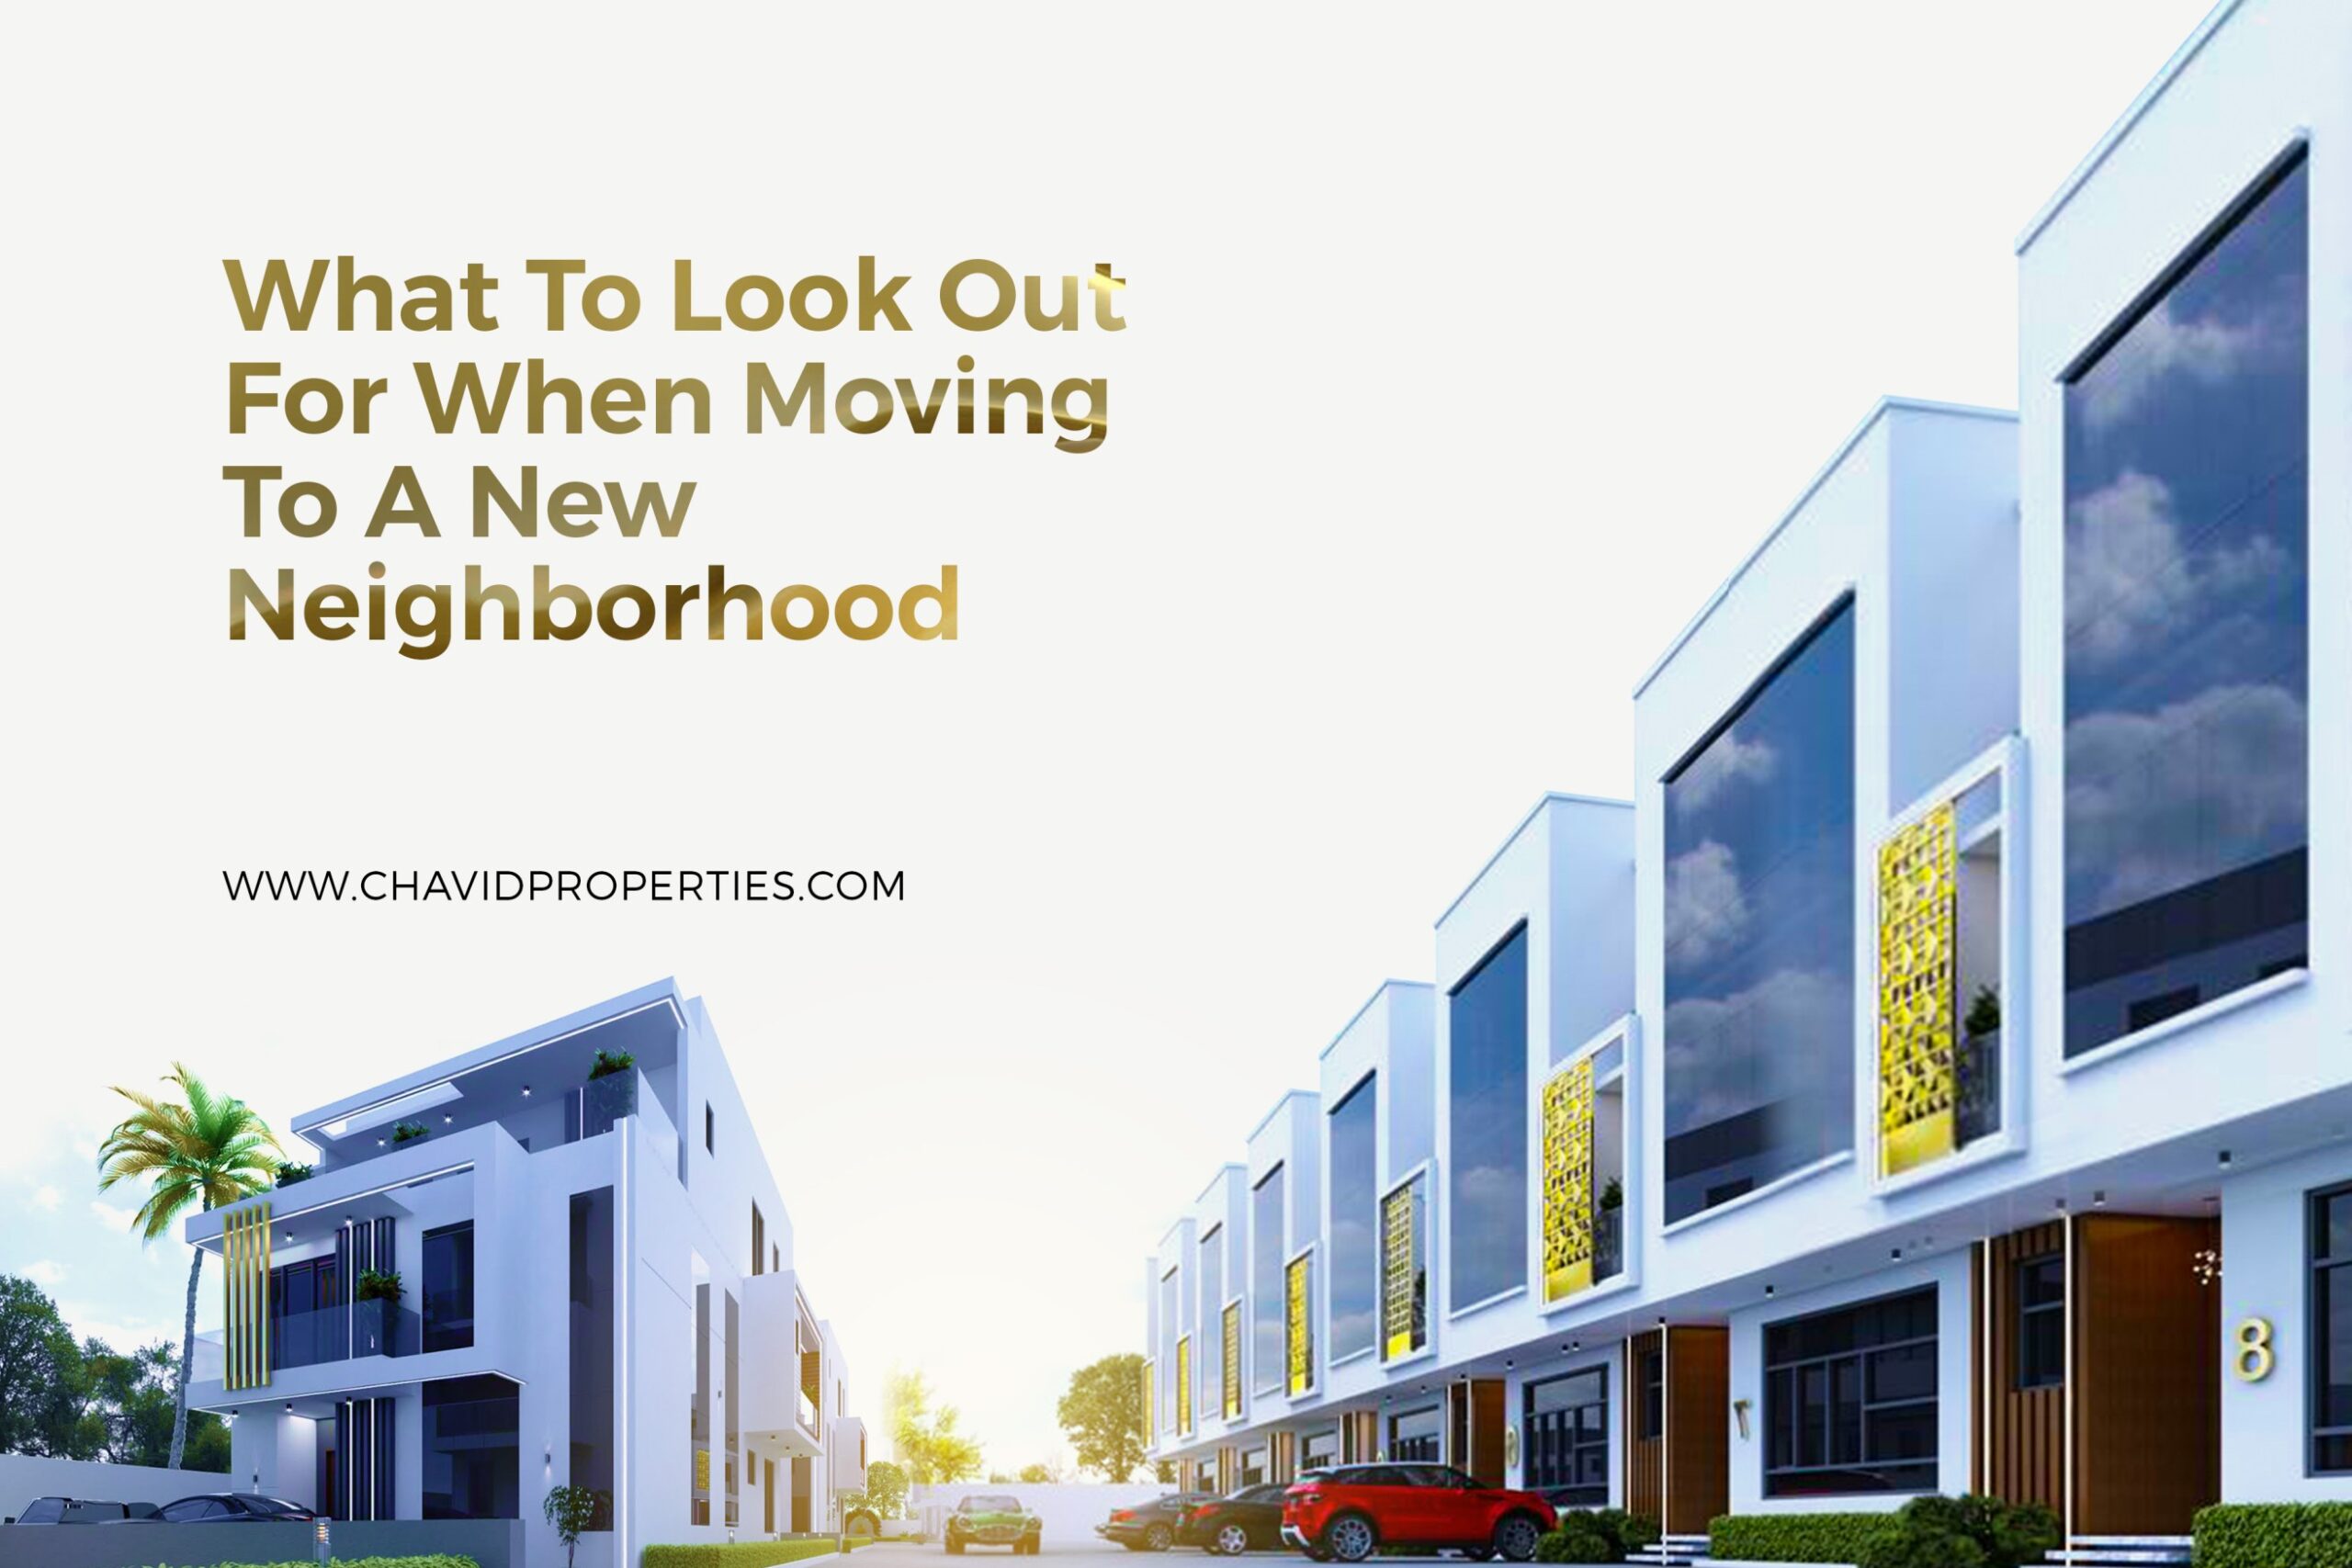 What To Look Out For When Moving To A New Neighborhood